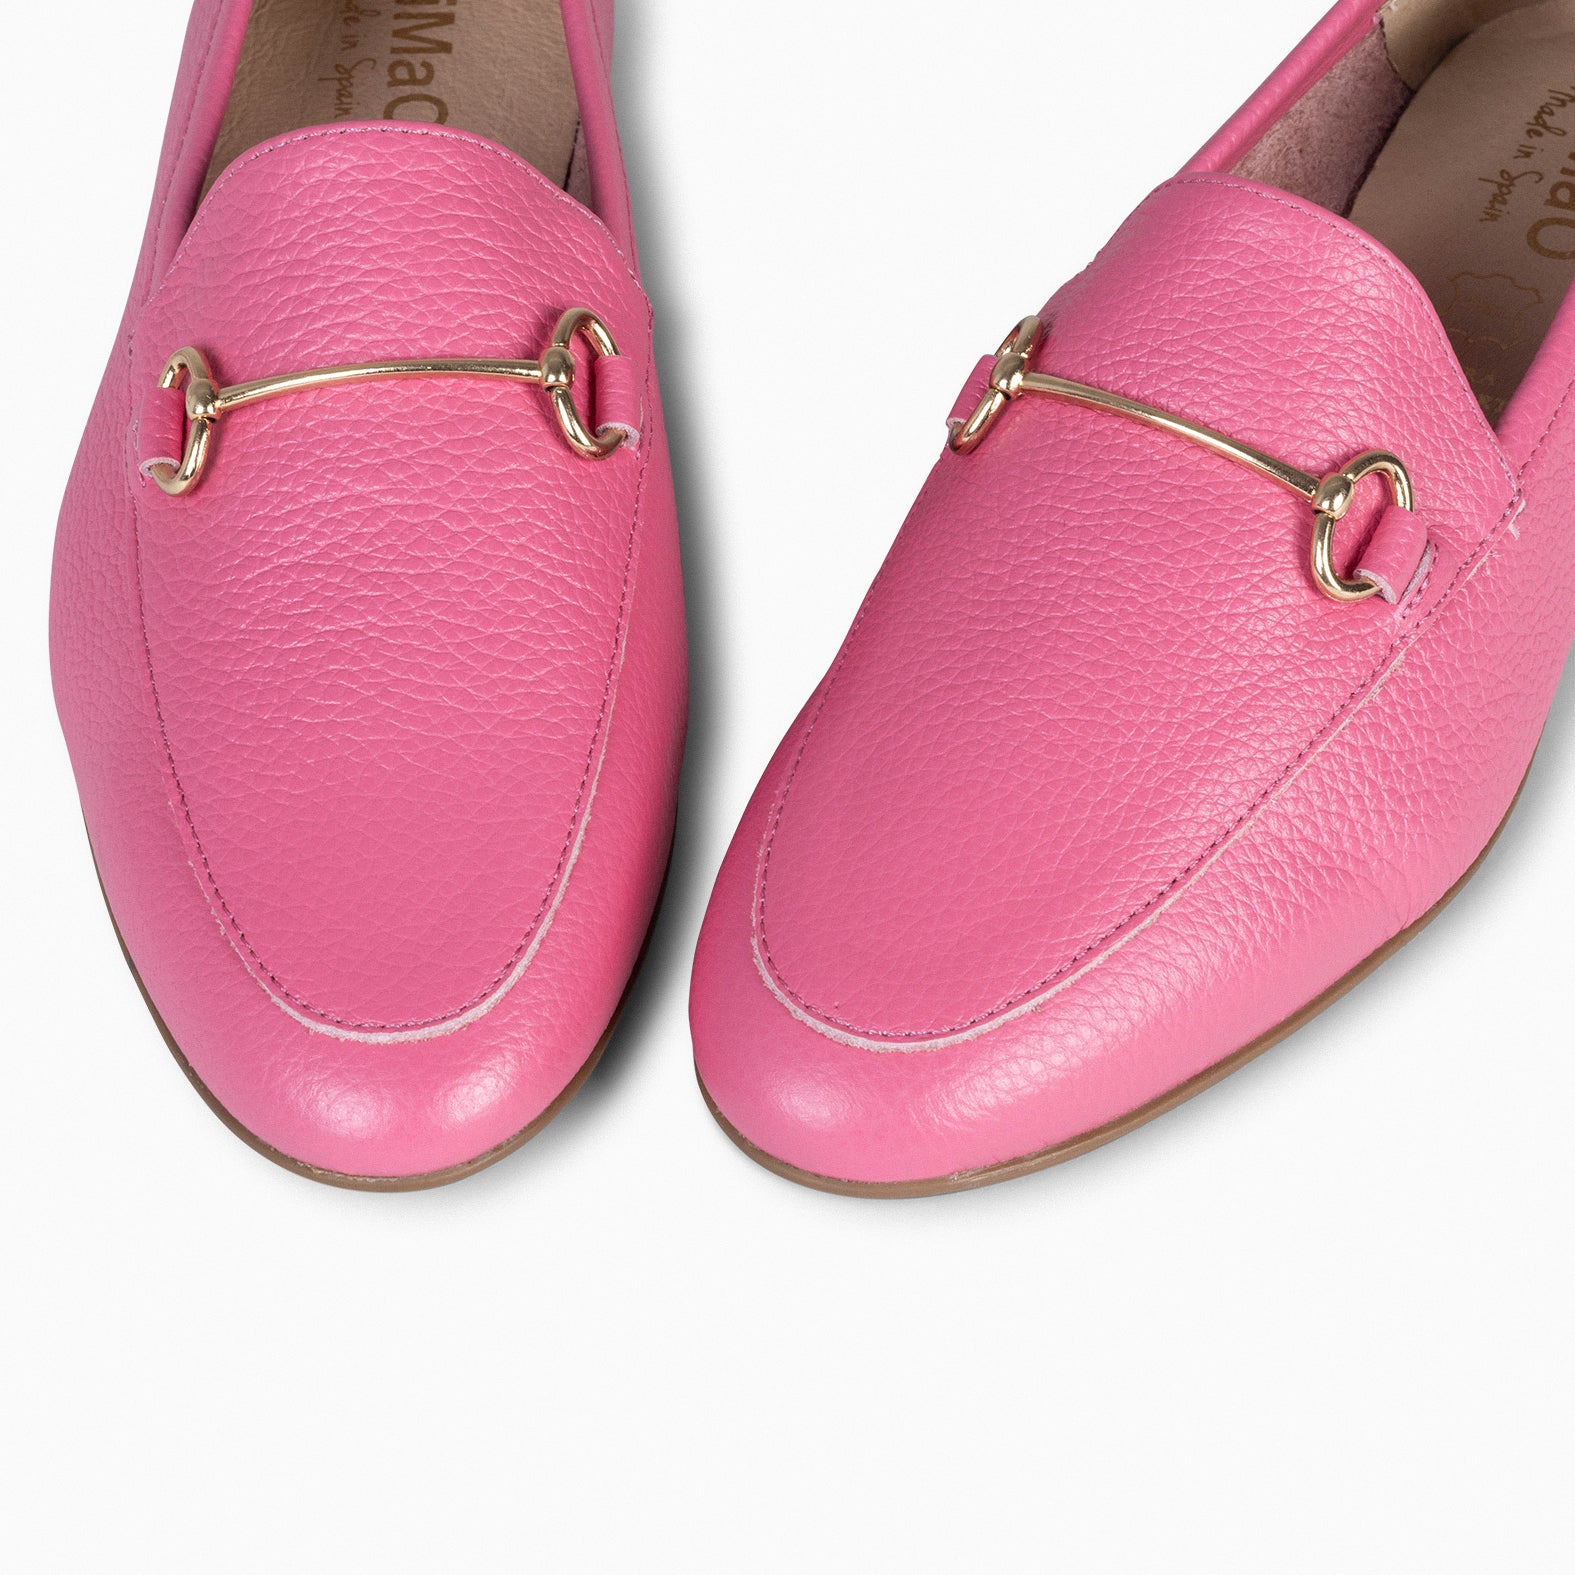 STYLE – PALE PINK moccasins with horsebit